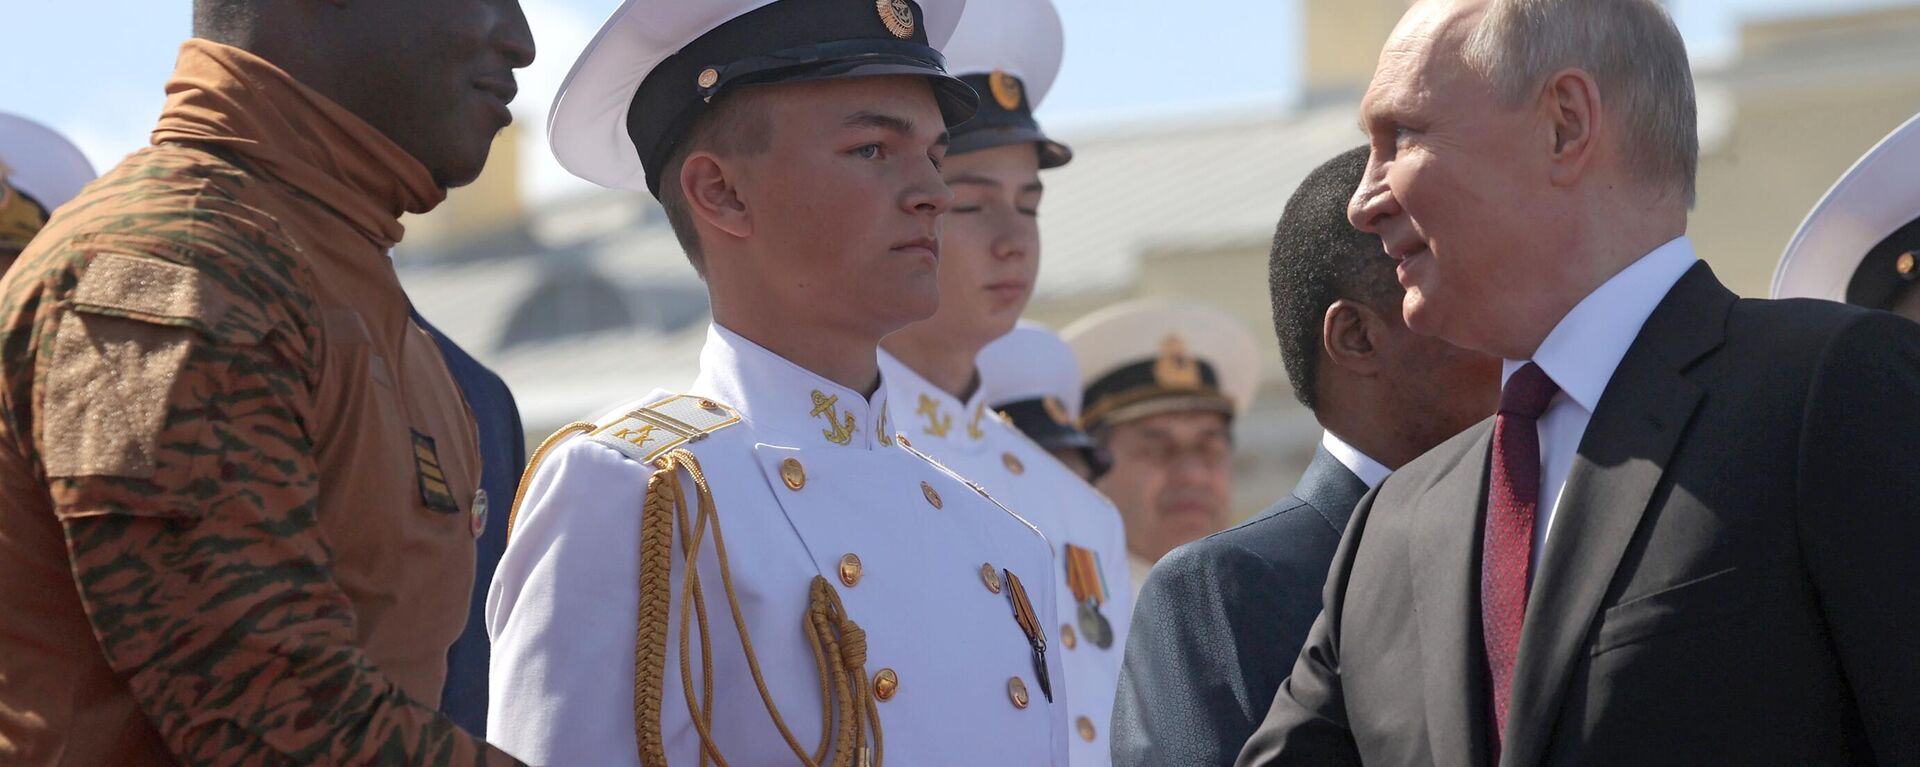 President of the Russian Federation, Supreme Commander-in-Chief Vladimir Putin and President of the Transitional Period of the Republic of Burkina Faso Ibrahim Traore (left) at the Main Naval Parade on the occasion of the Russian Navy Day, July 30, 2023 - Sputnik Africa, 1920, 30.07.2023